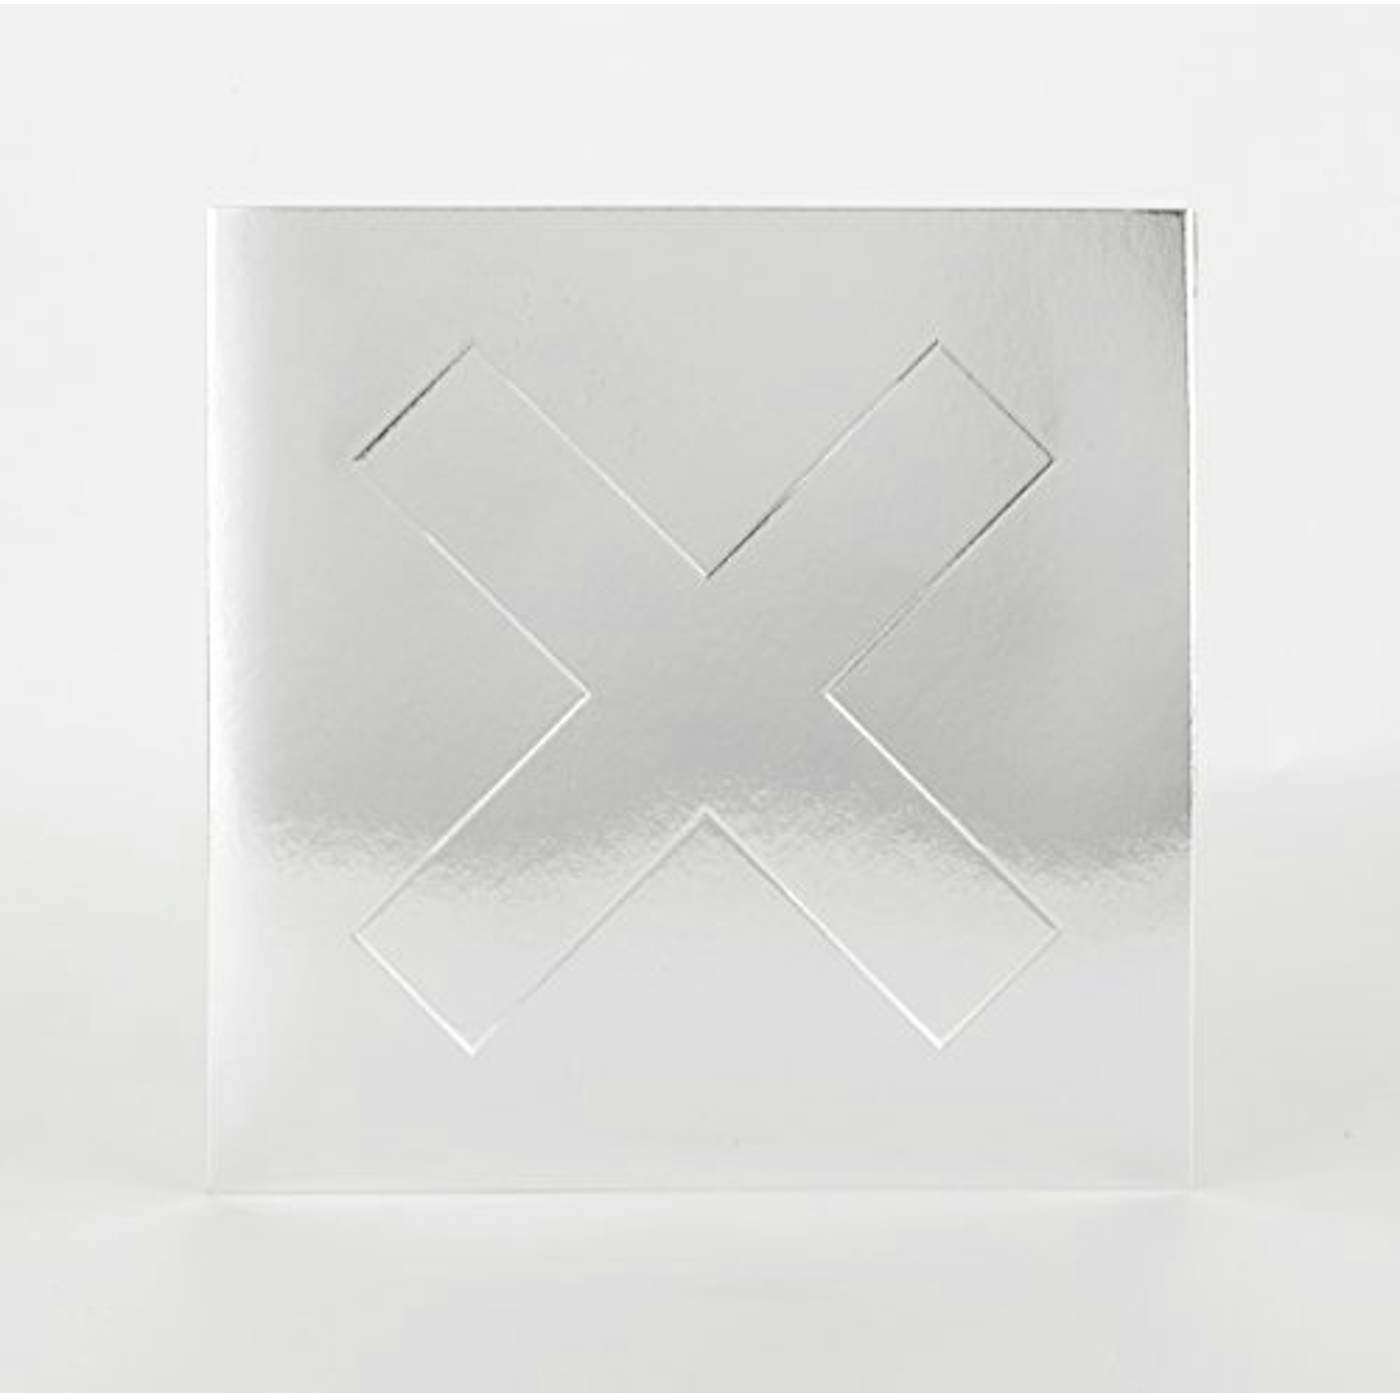 The xx I SEE YOU: LIMITED EDITION CD